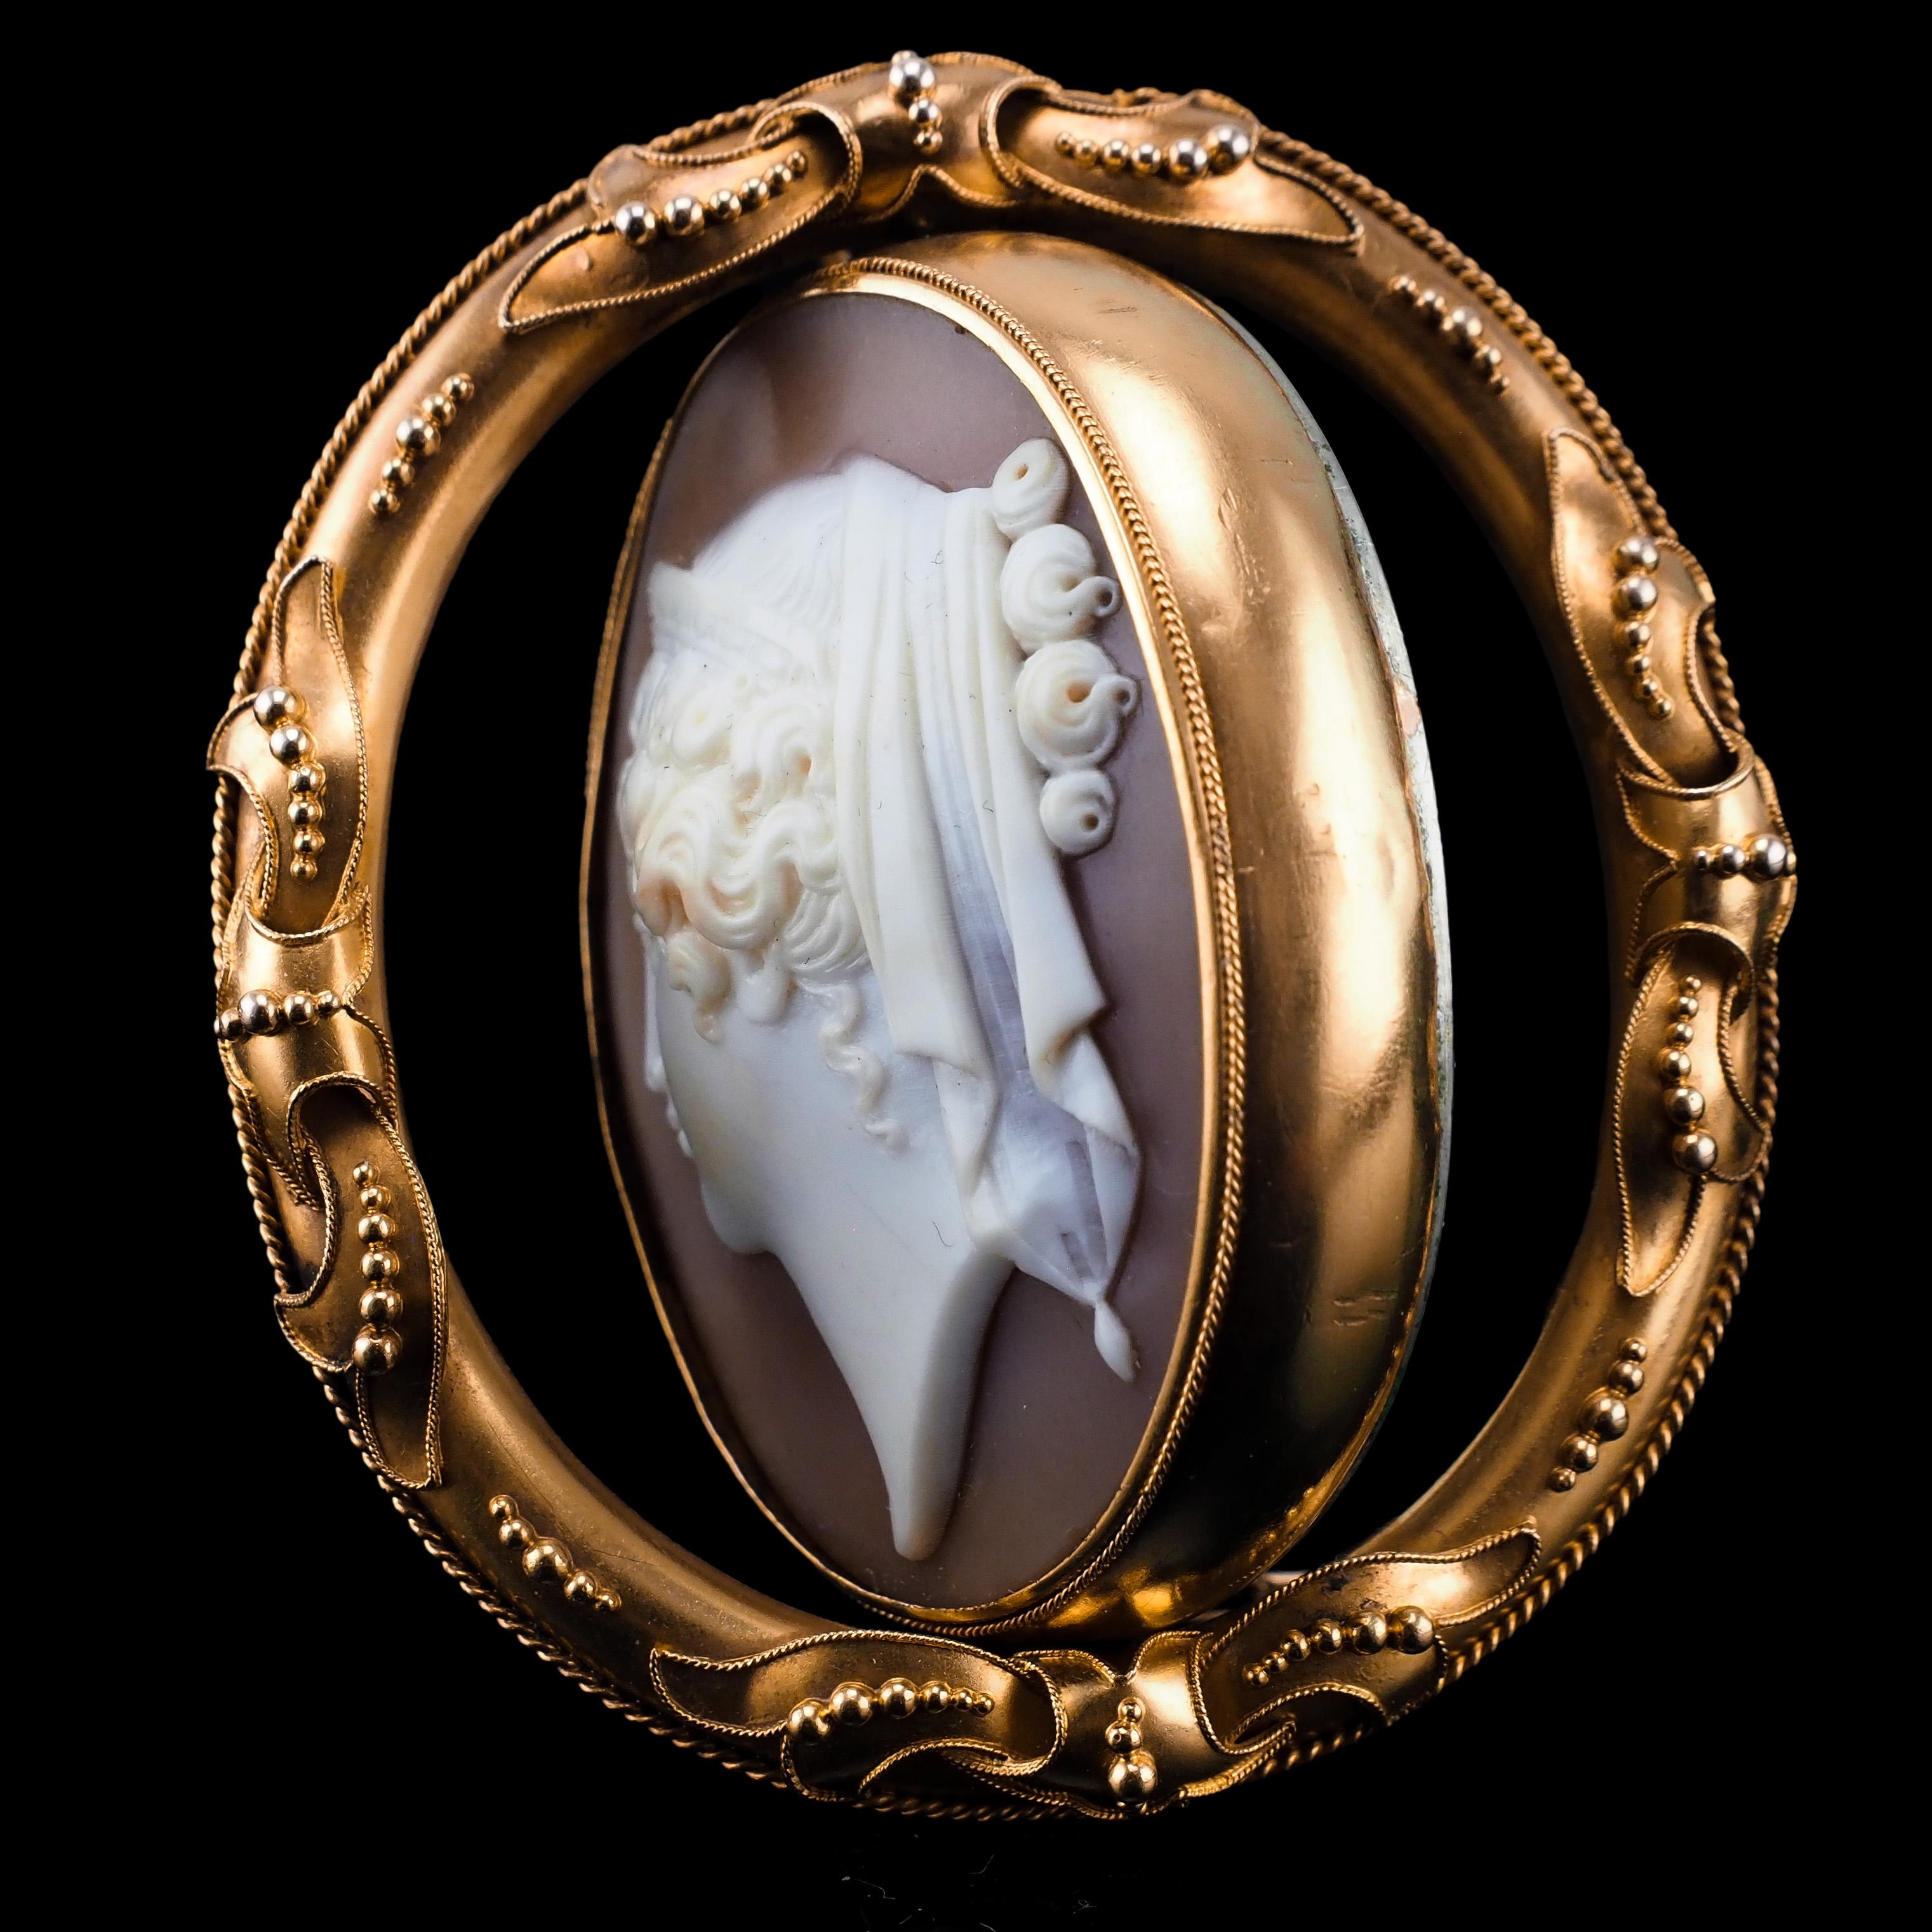 Antique Cameo Brooch Pendant Necklace 18K Gold - Victorian c.1860 For Sale 8